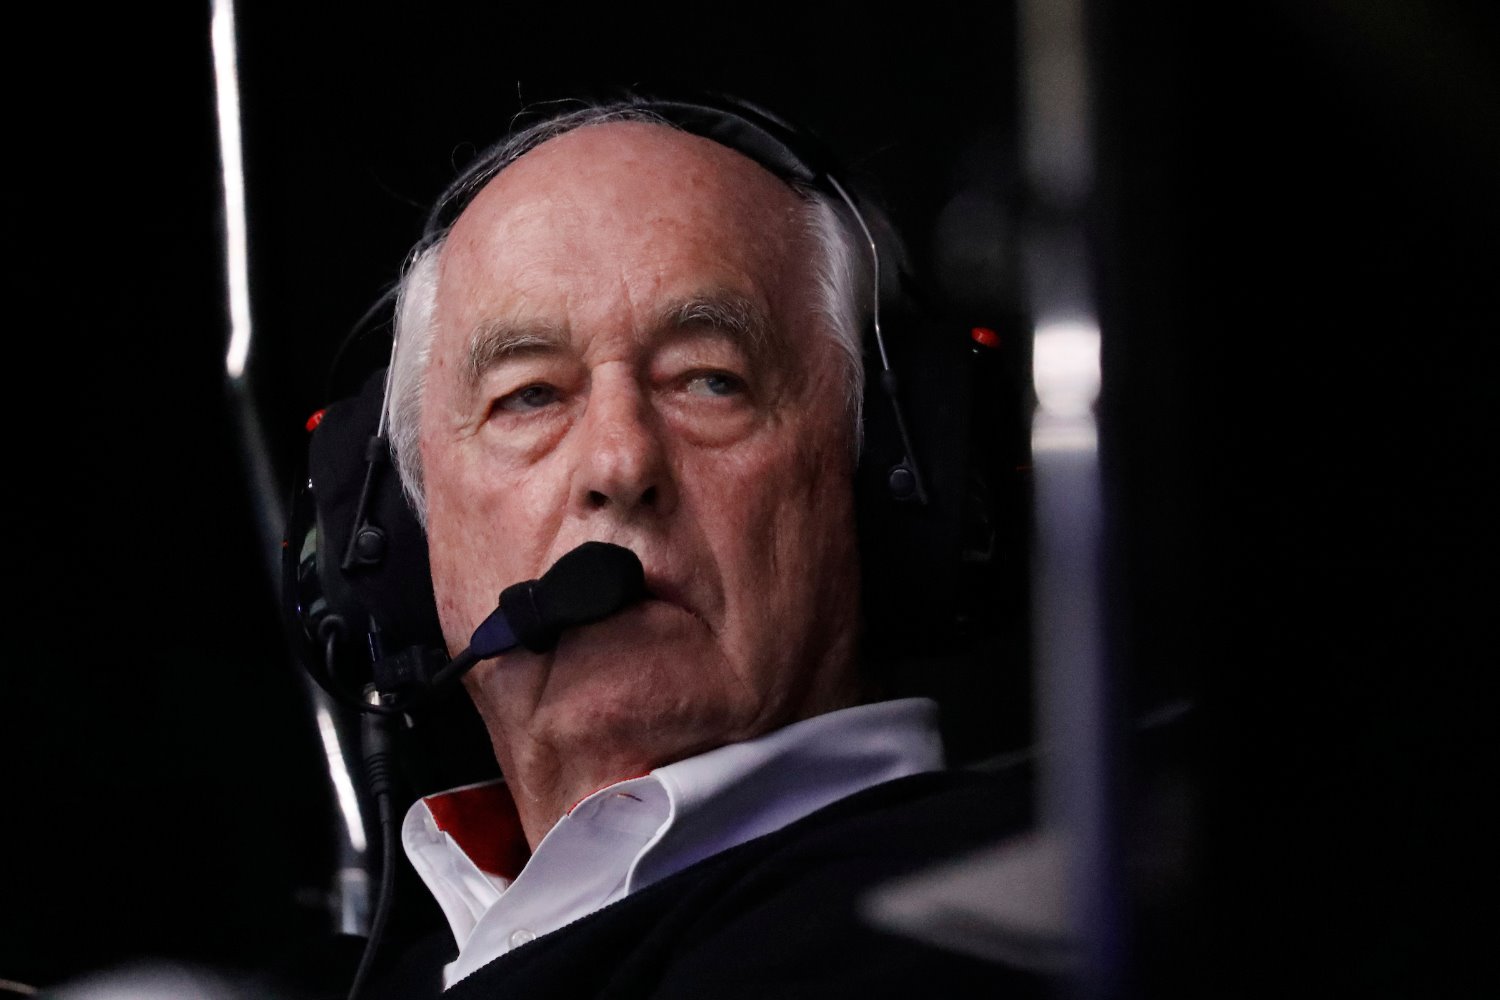 Roger Penske prefers to spend money on paint at IMS instead of putting more IndyCar races on network TV